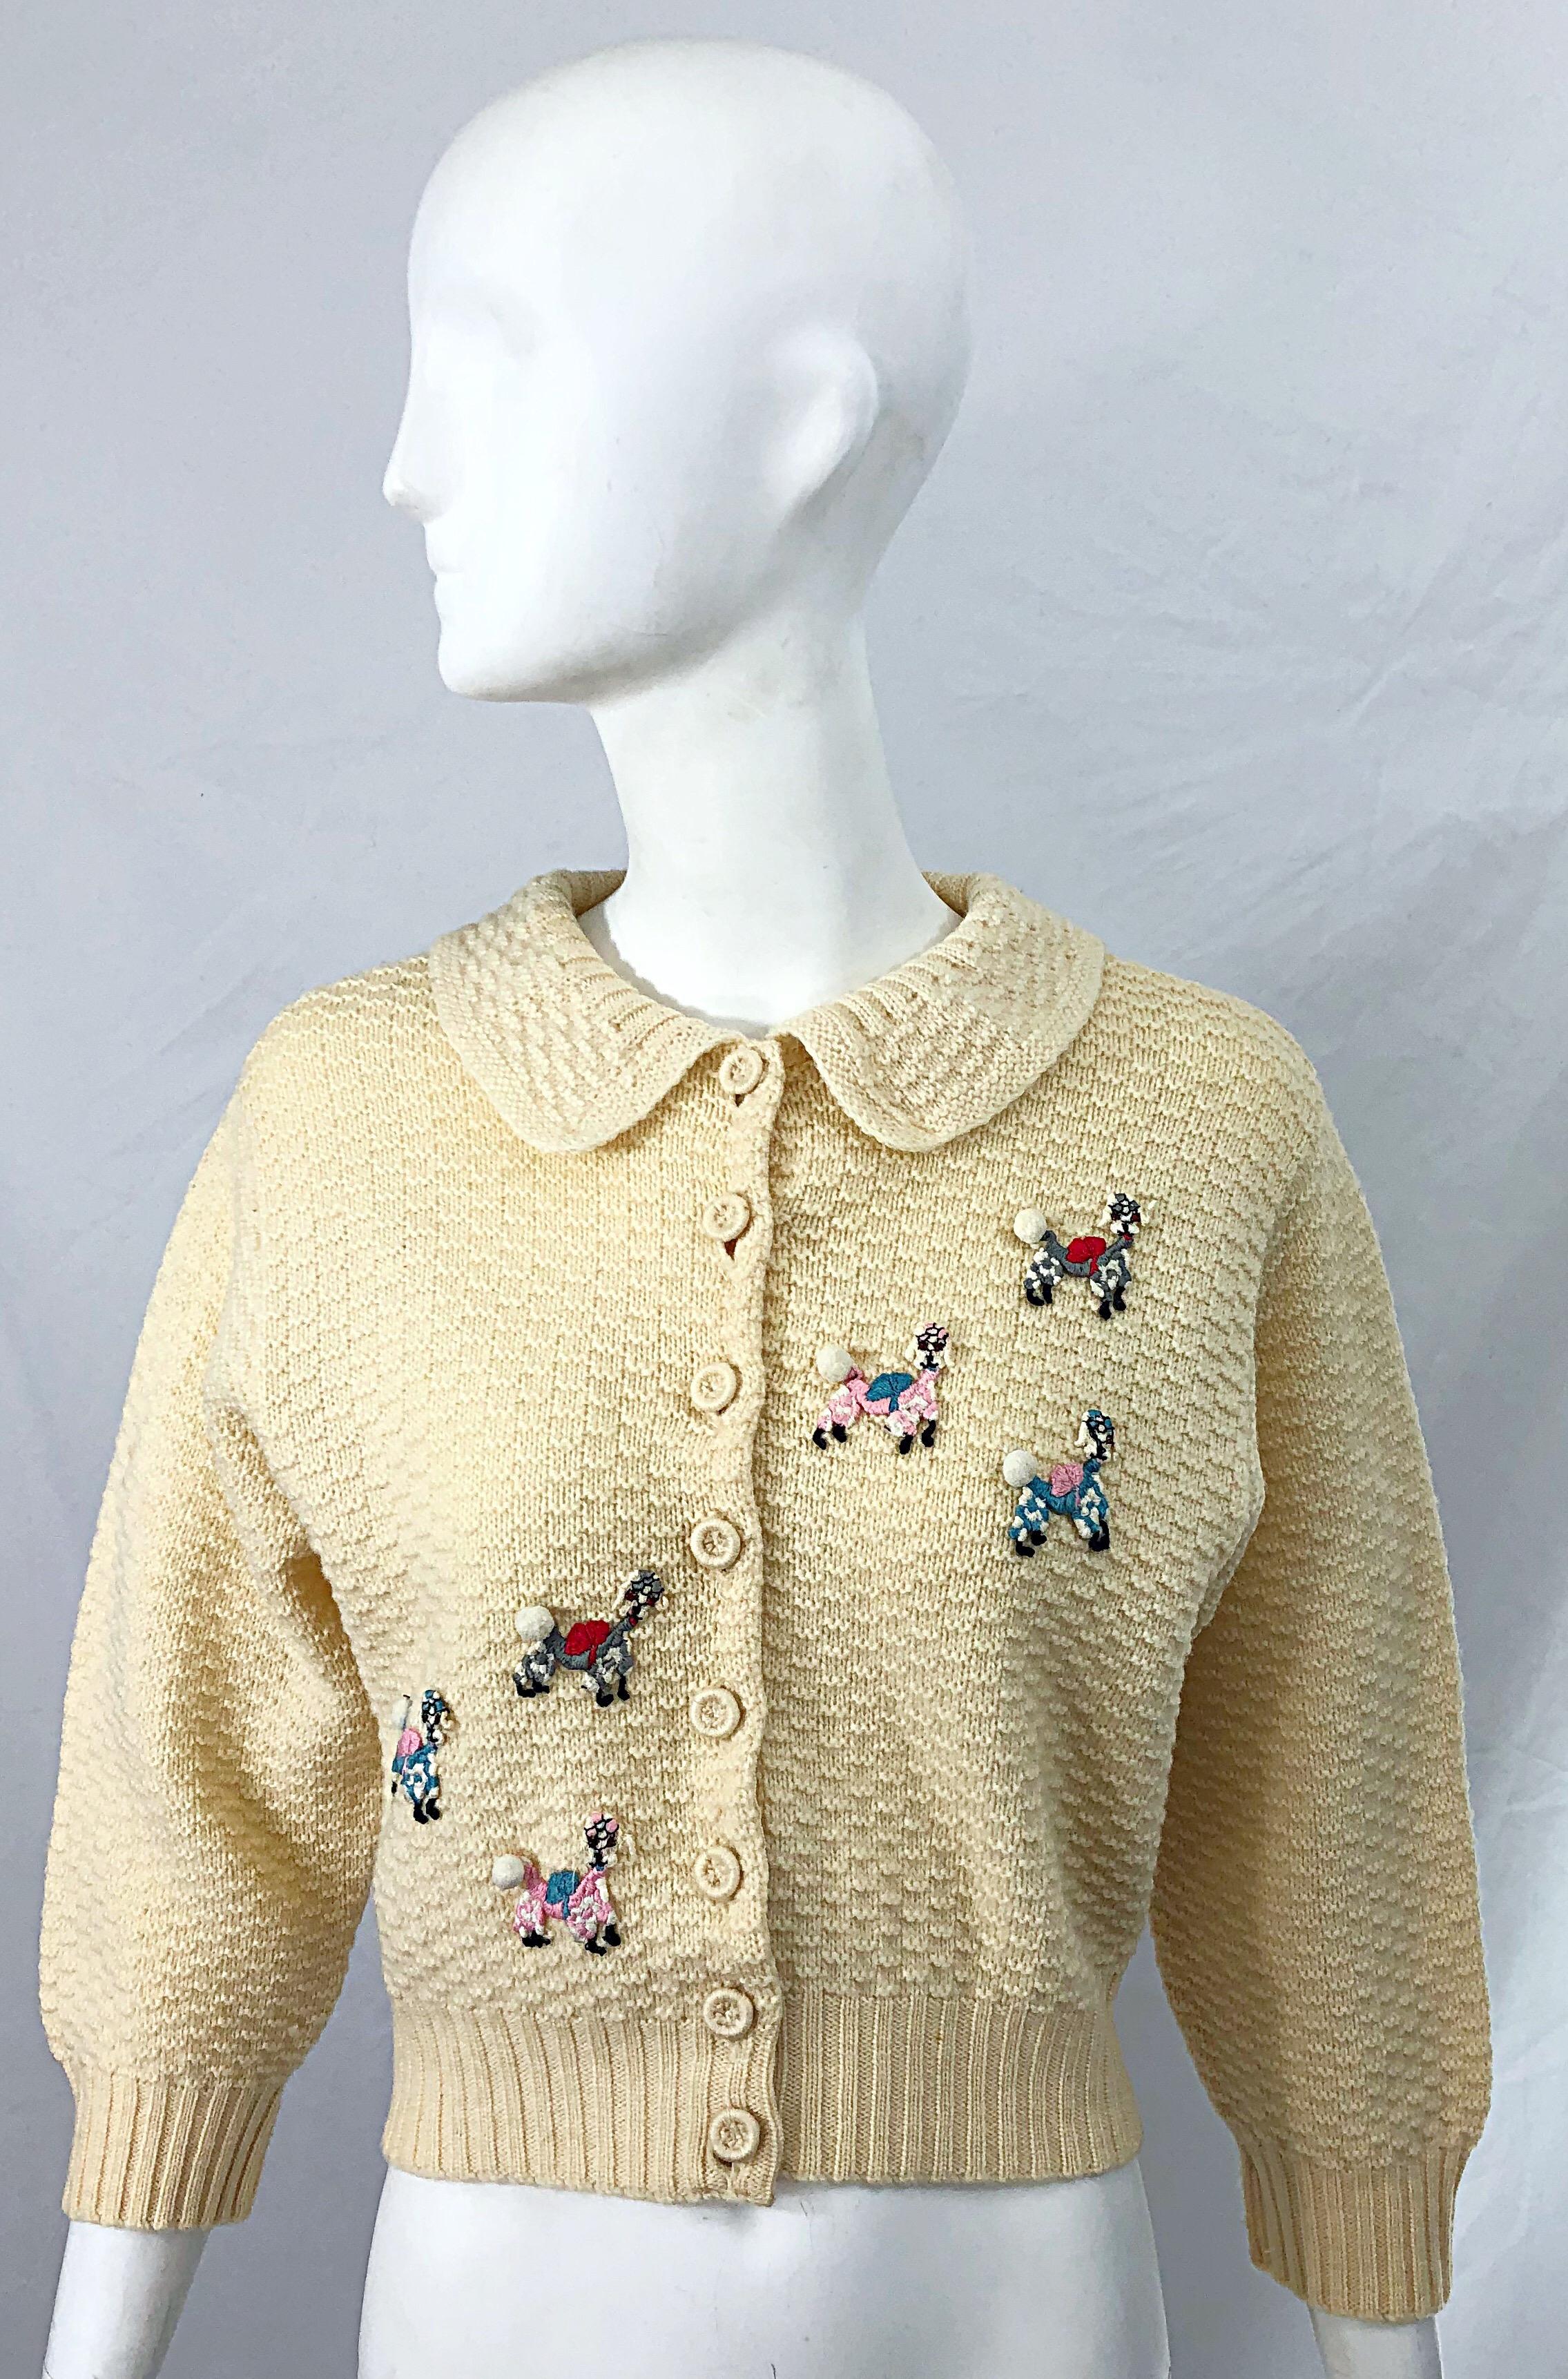 Rare and highly collectible 1950s ELSA SCHIAPARELLI novelty poodle themed ivory / off - white cardigan sweater ! Features six embroidered poodles on the front of the sweater. I have had quite a few Schiaparelli pieces, but this is one of the best !